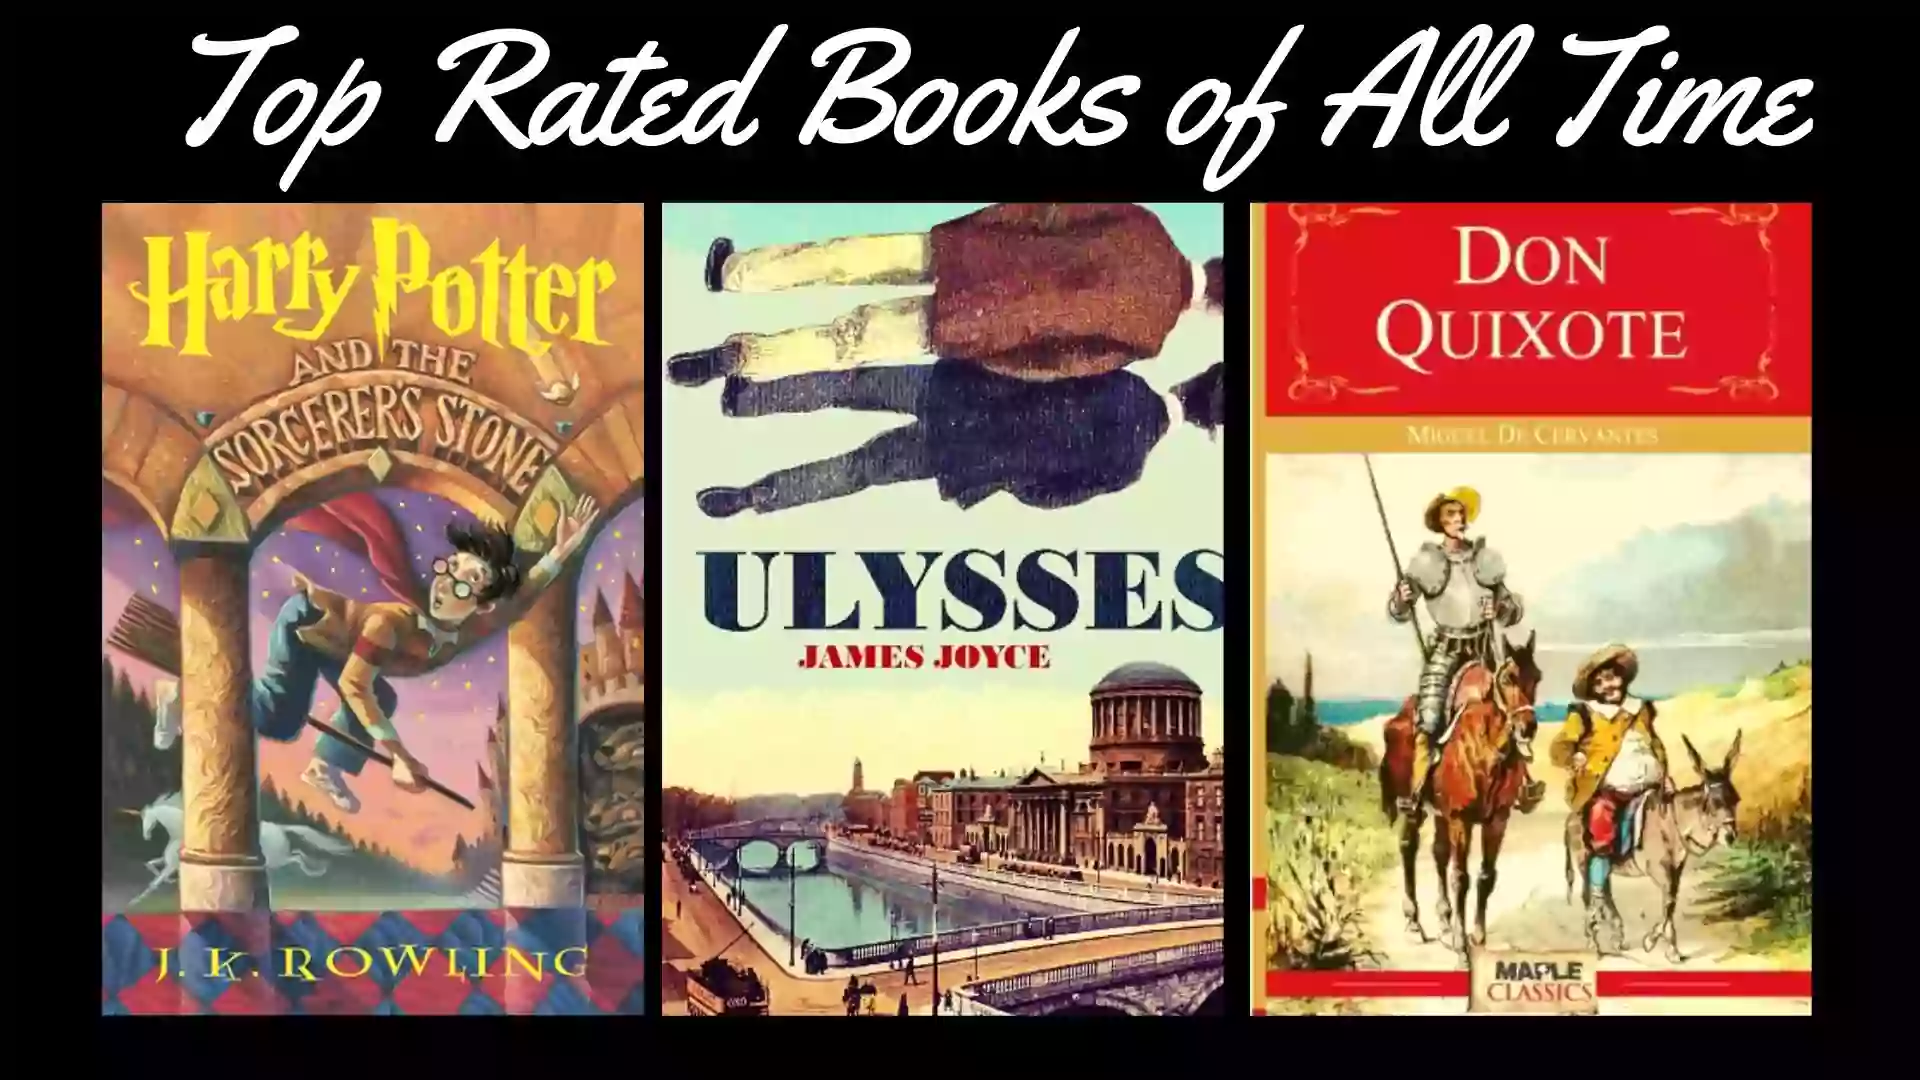 Top Rated Books of All Time